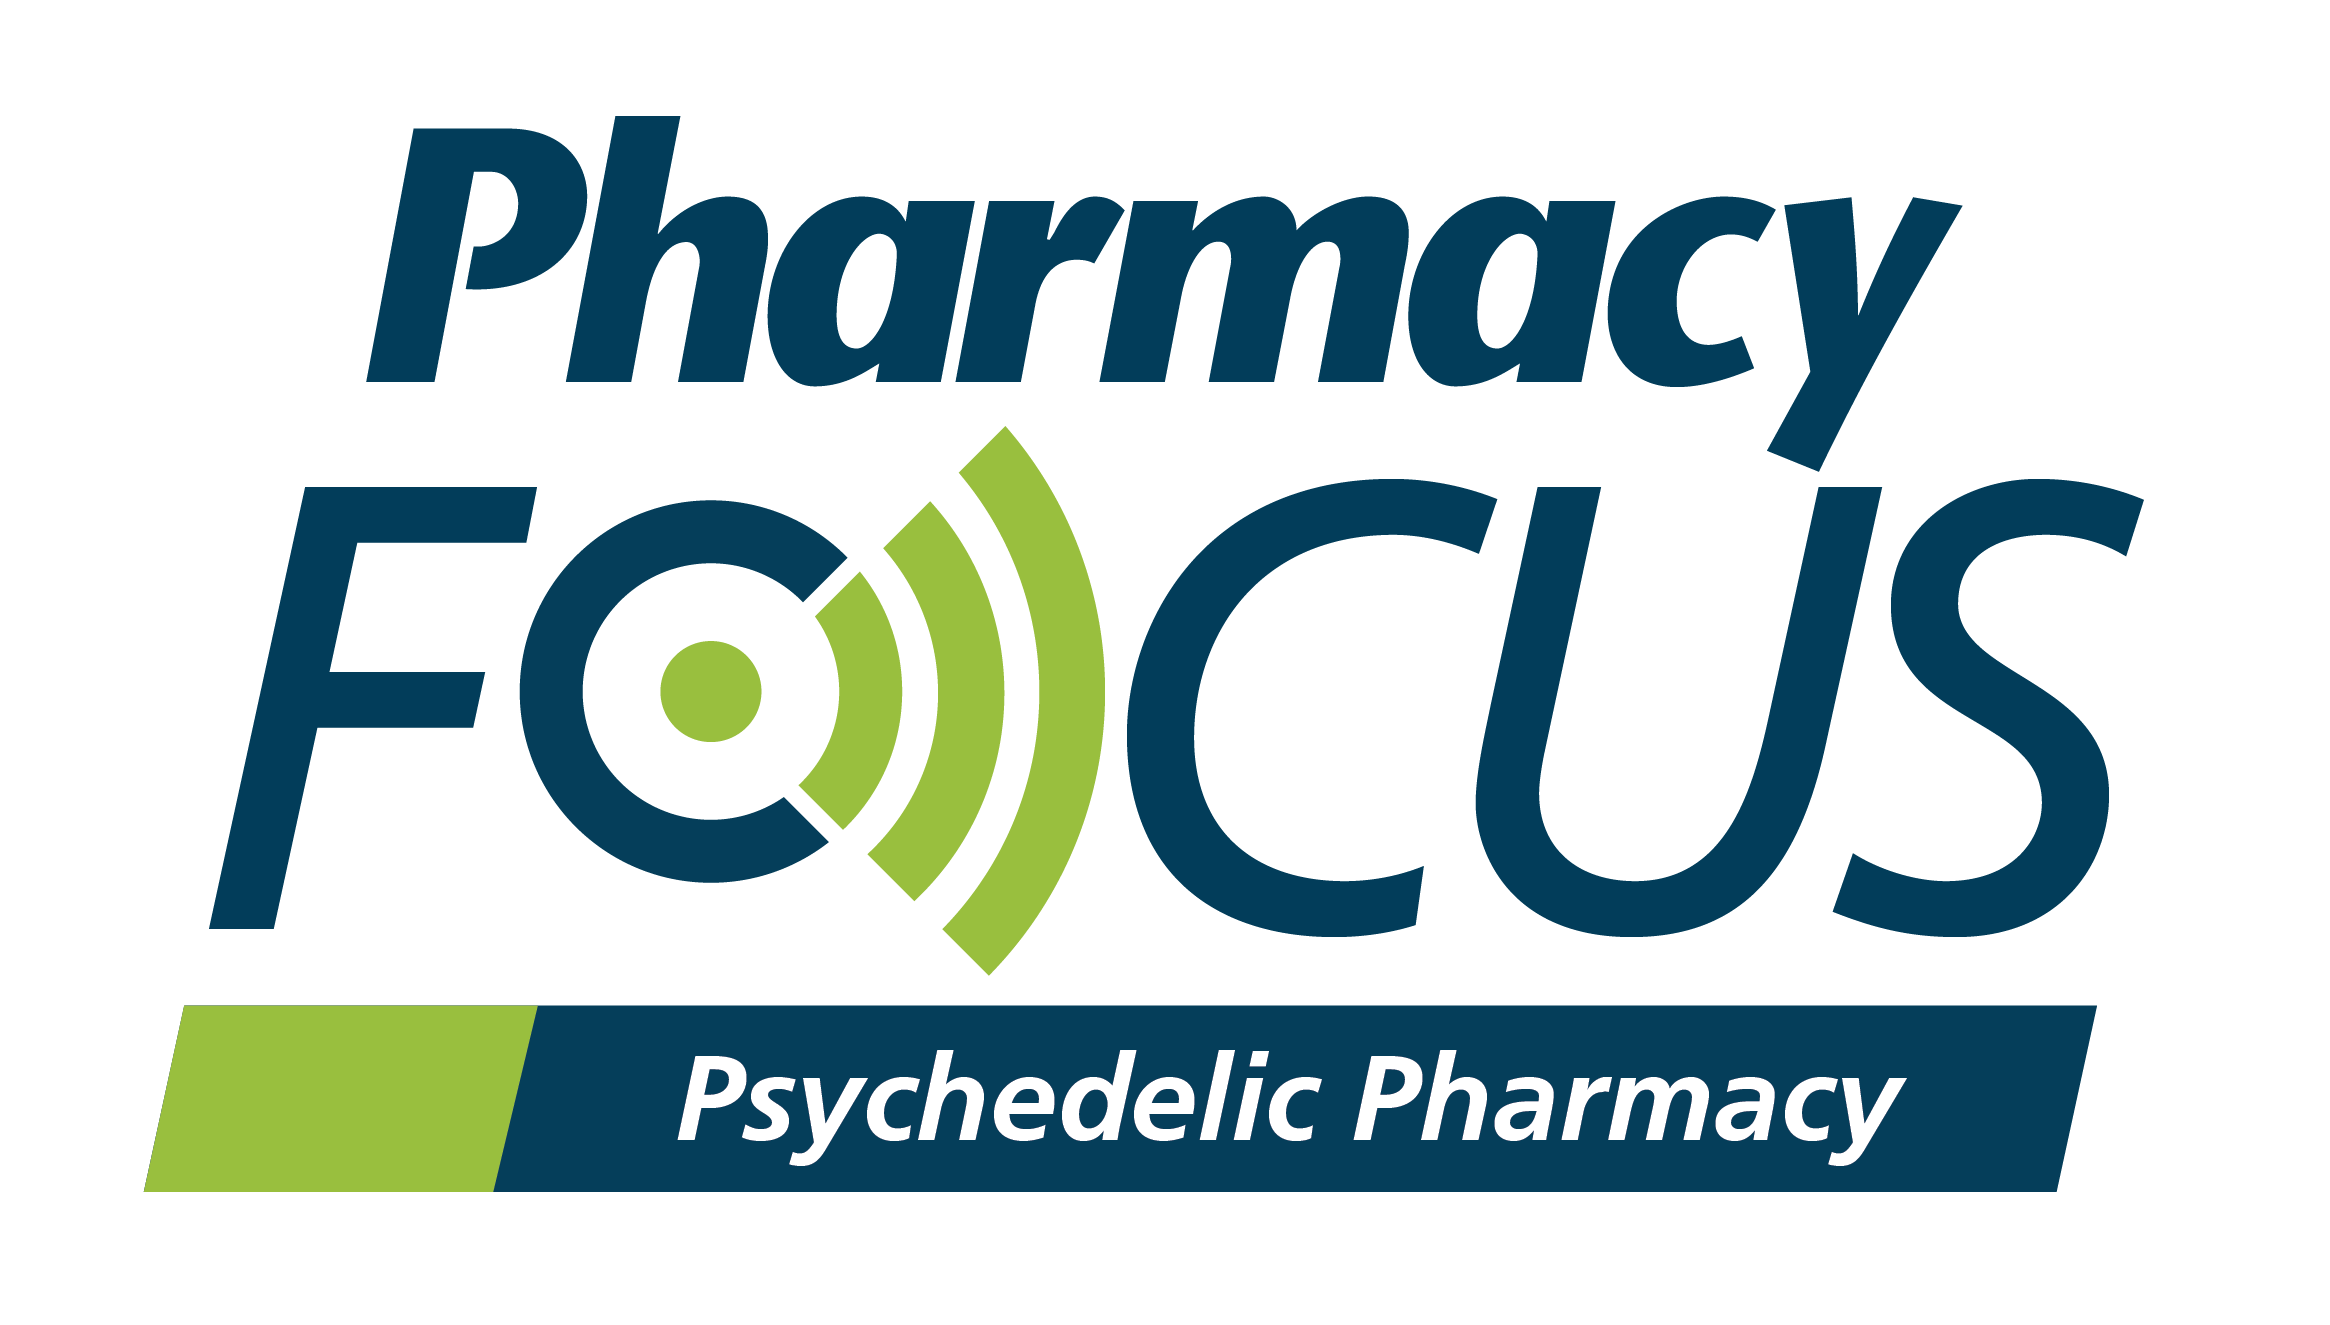 Pharmacy Focus: Psychedelic Pharmacy - An Exploration of Psychedelic Medicines in Palliative Care